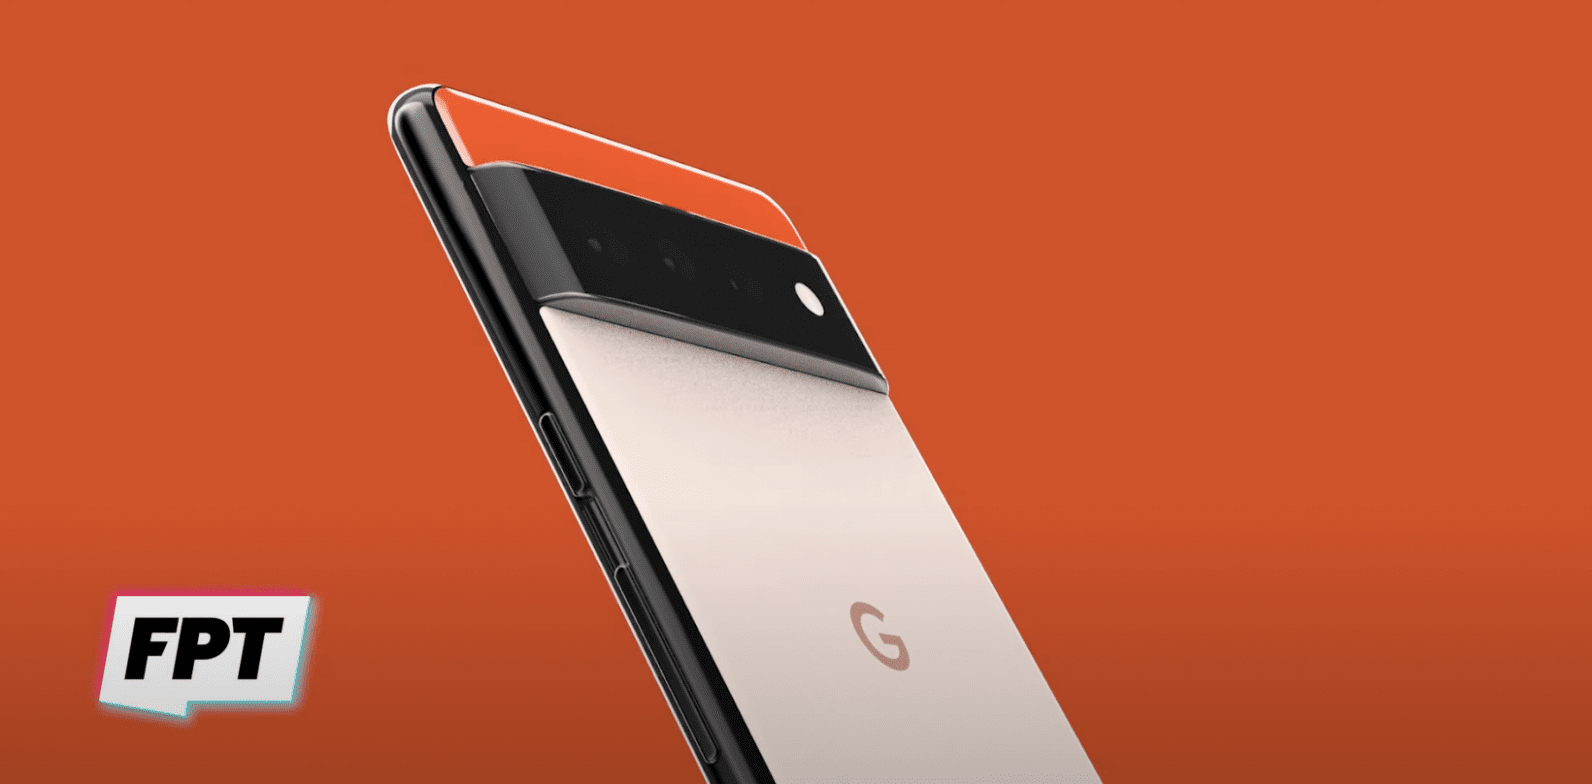 The Pixel 6 (and Pixel 6 Pro) may get a radical new design